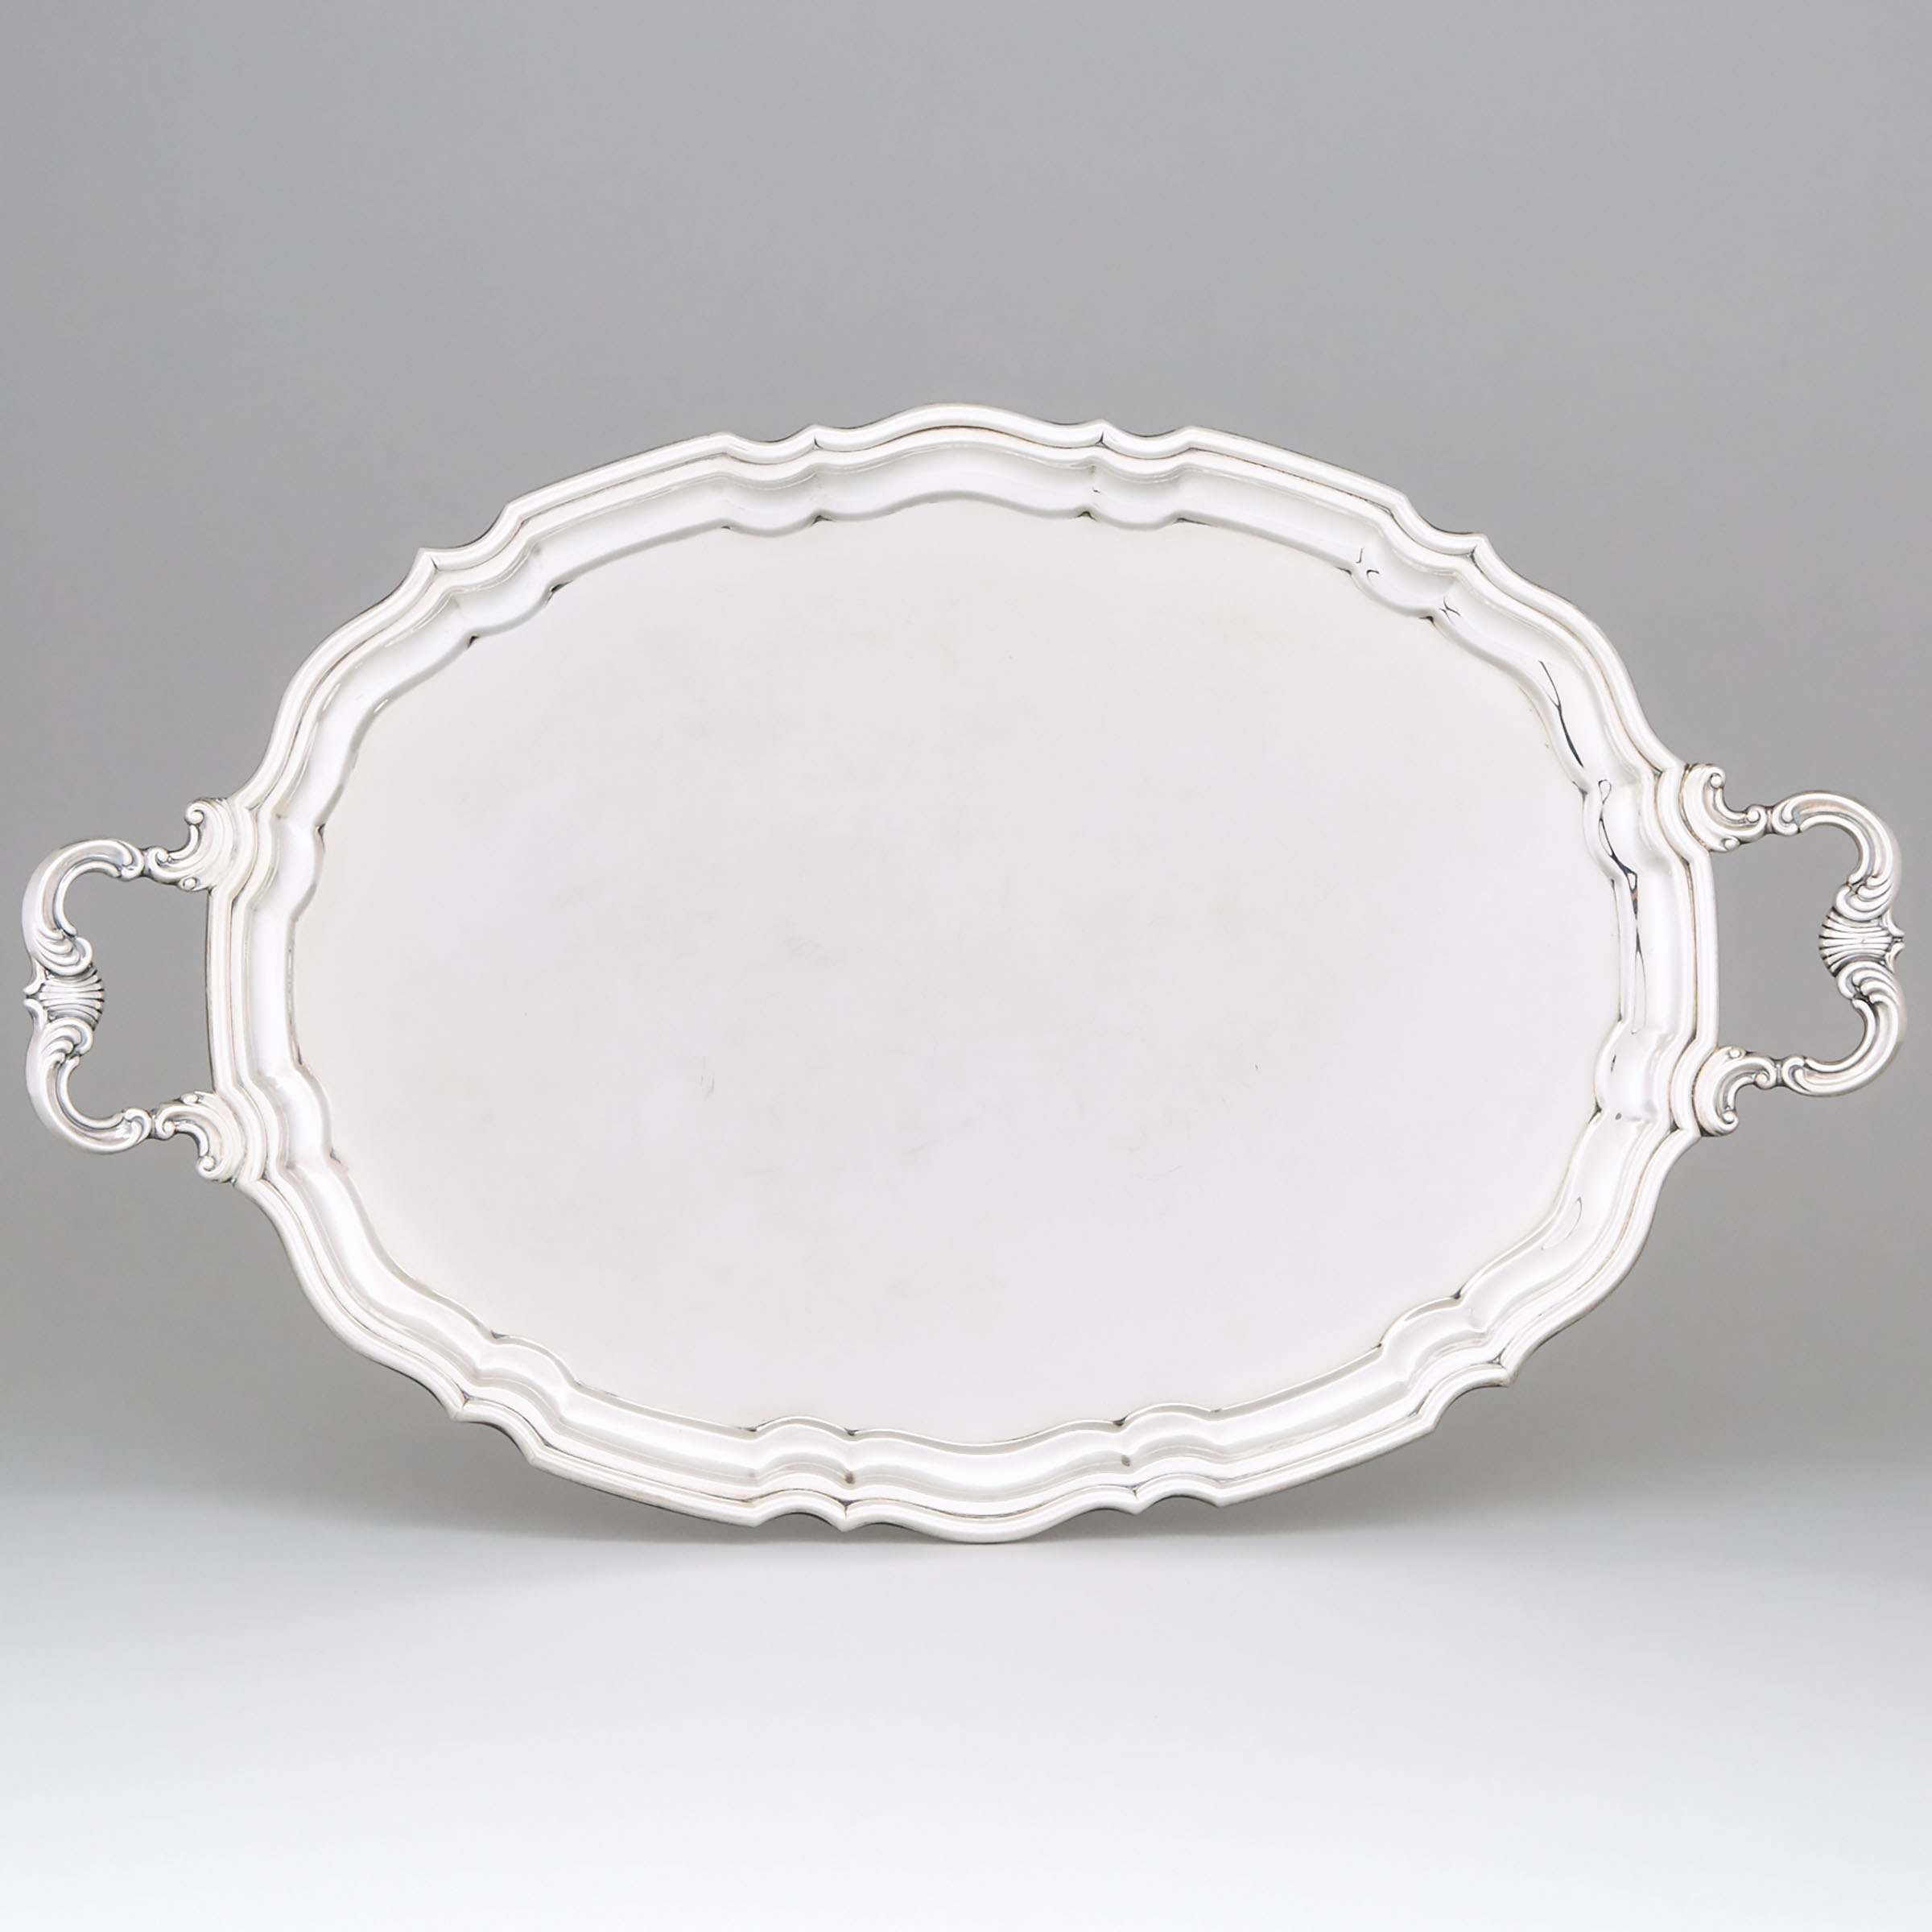 Canadian Silver Two-Handled Shaped Oval Serving Tray, Henry Birks & Sons, Montreal, Que., 1965